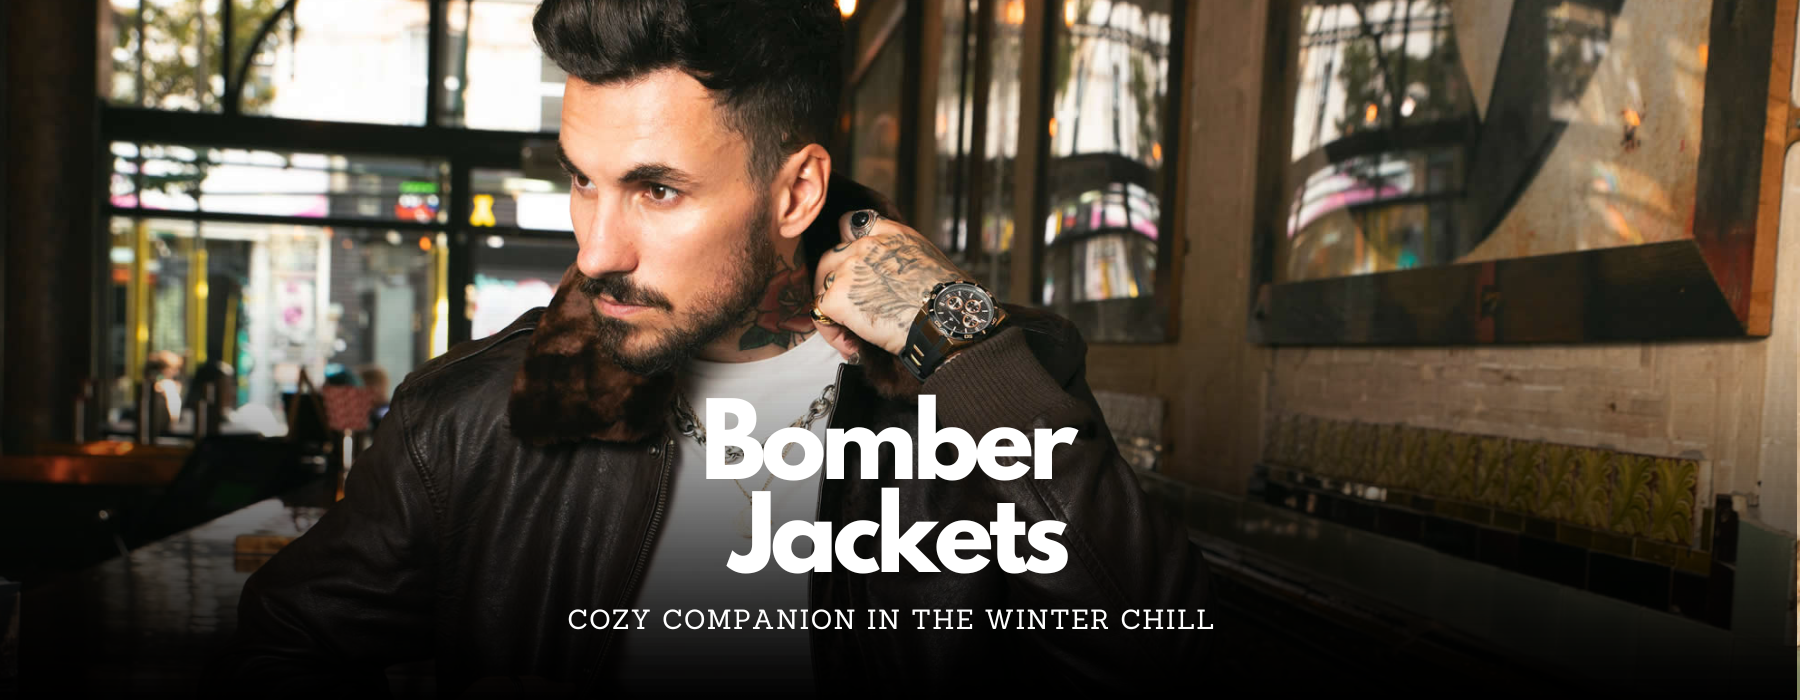 Bomber Jackets: Your Cozy Companion in the Winter Chill